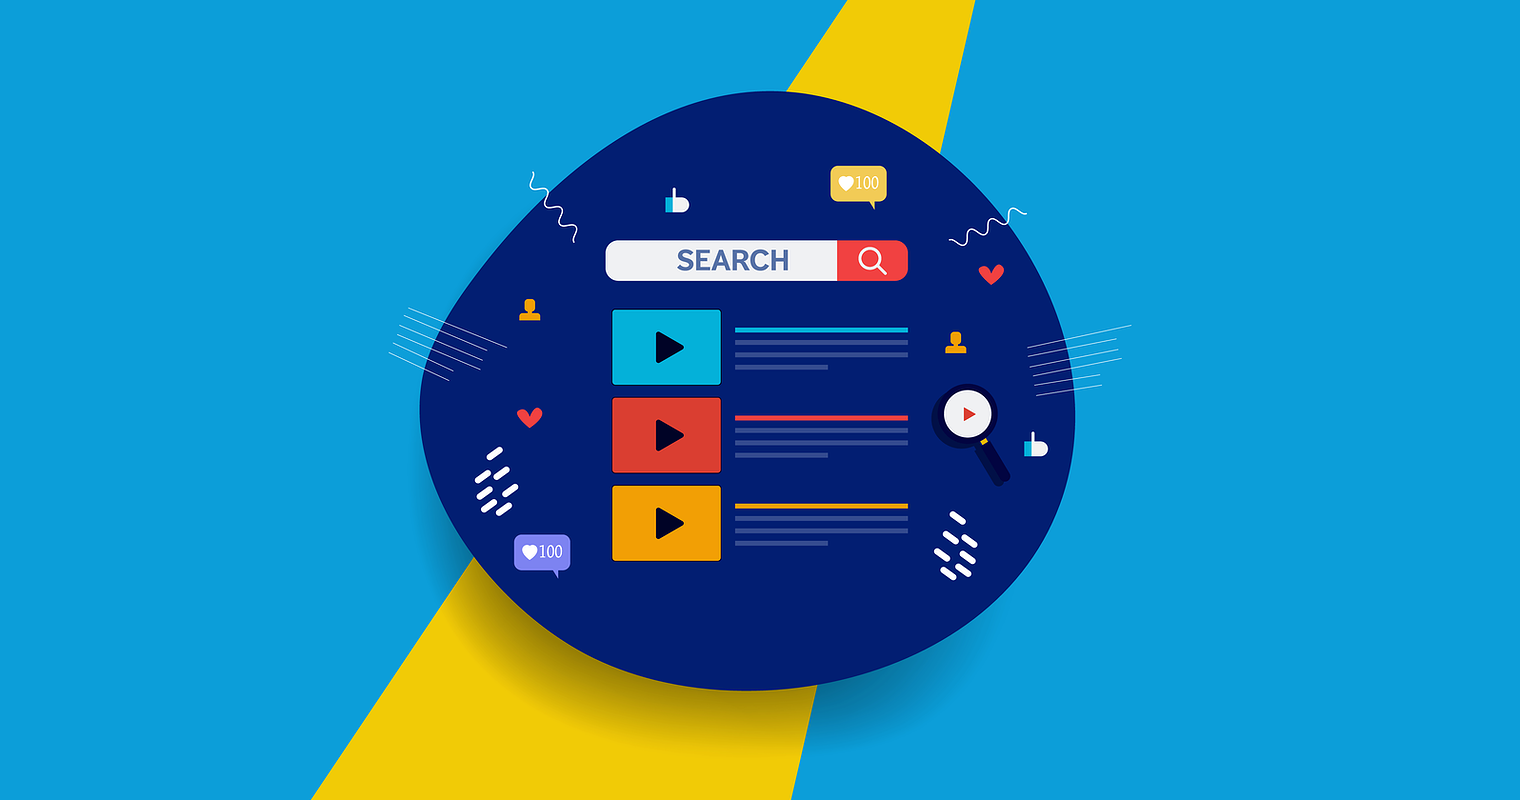 The 10 Best Video Search Engines